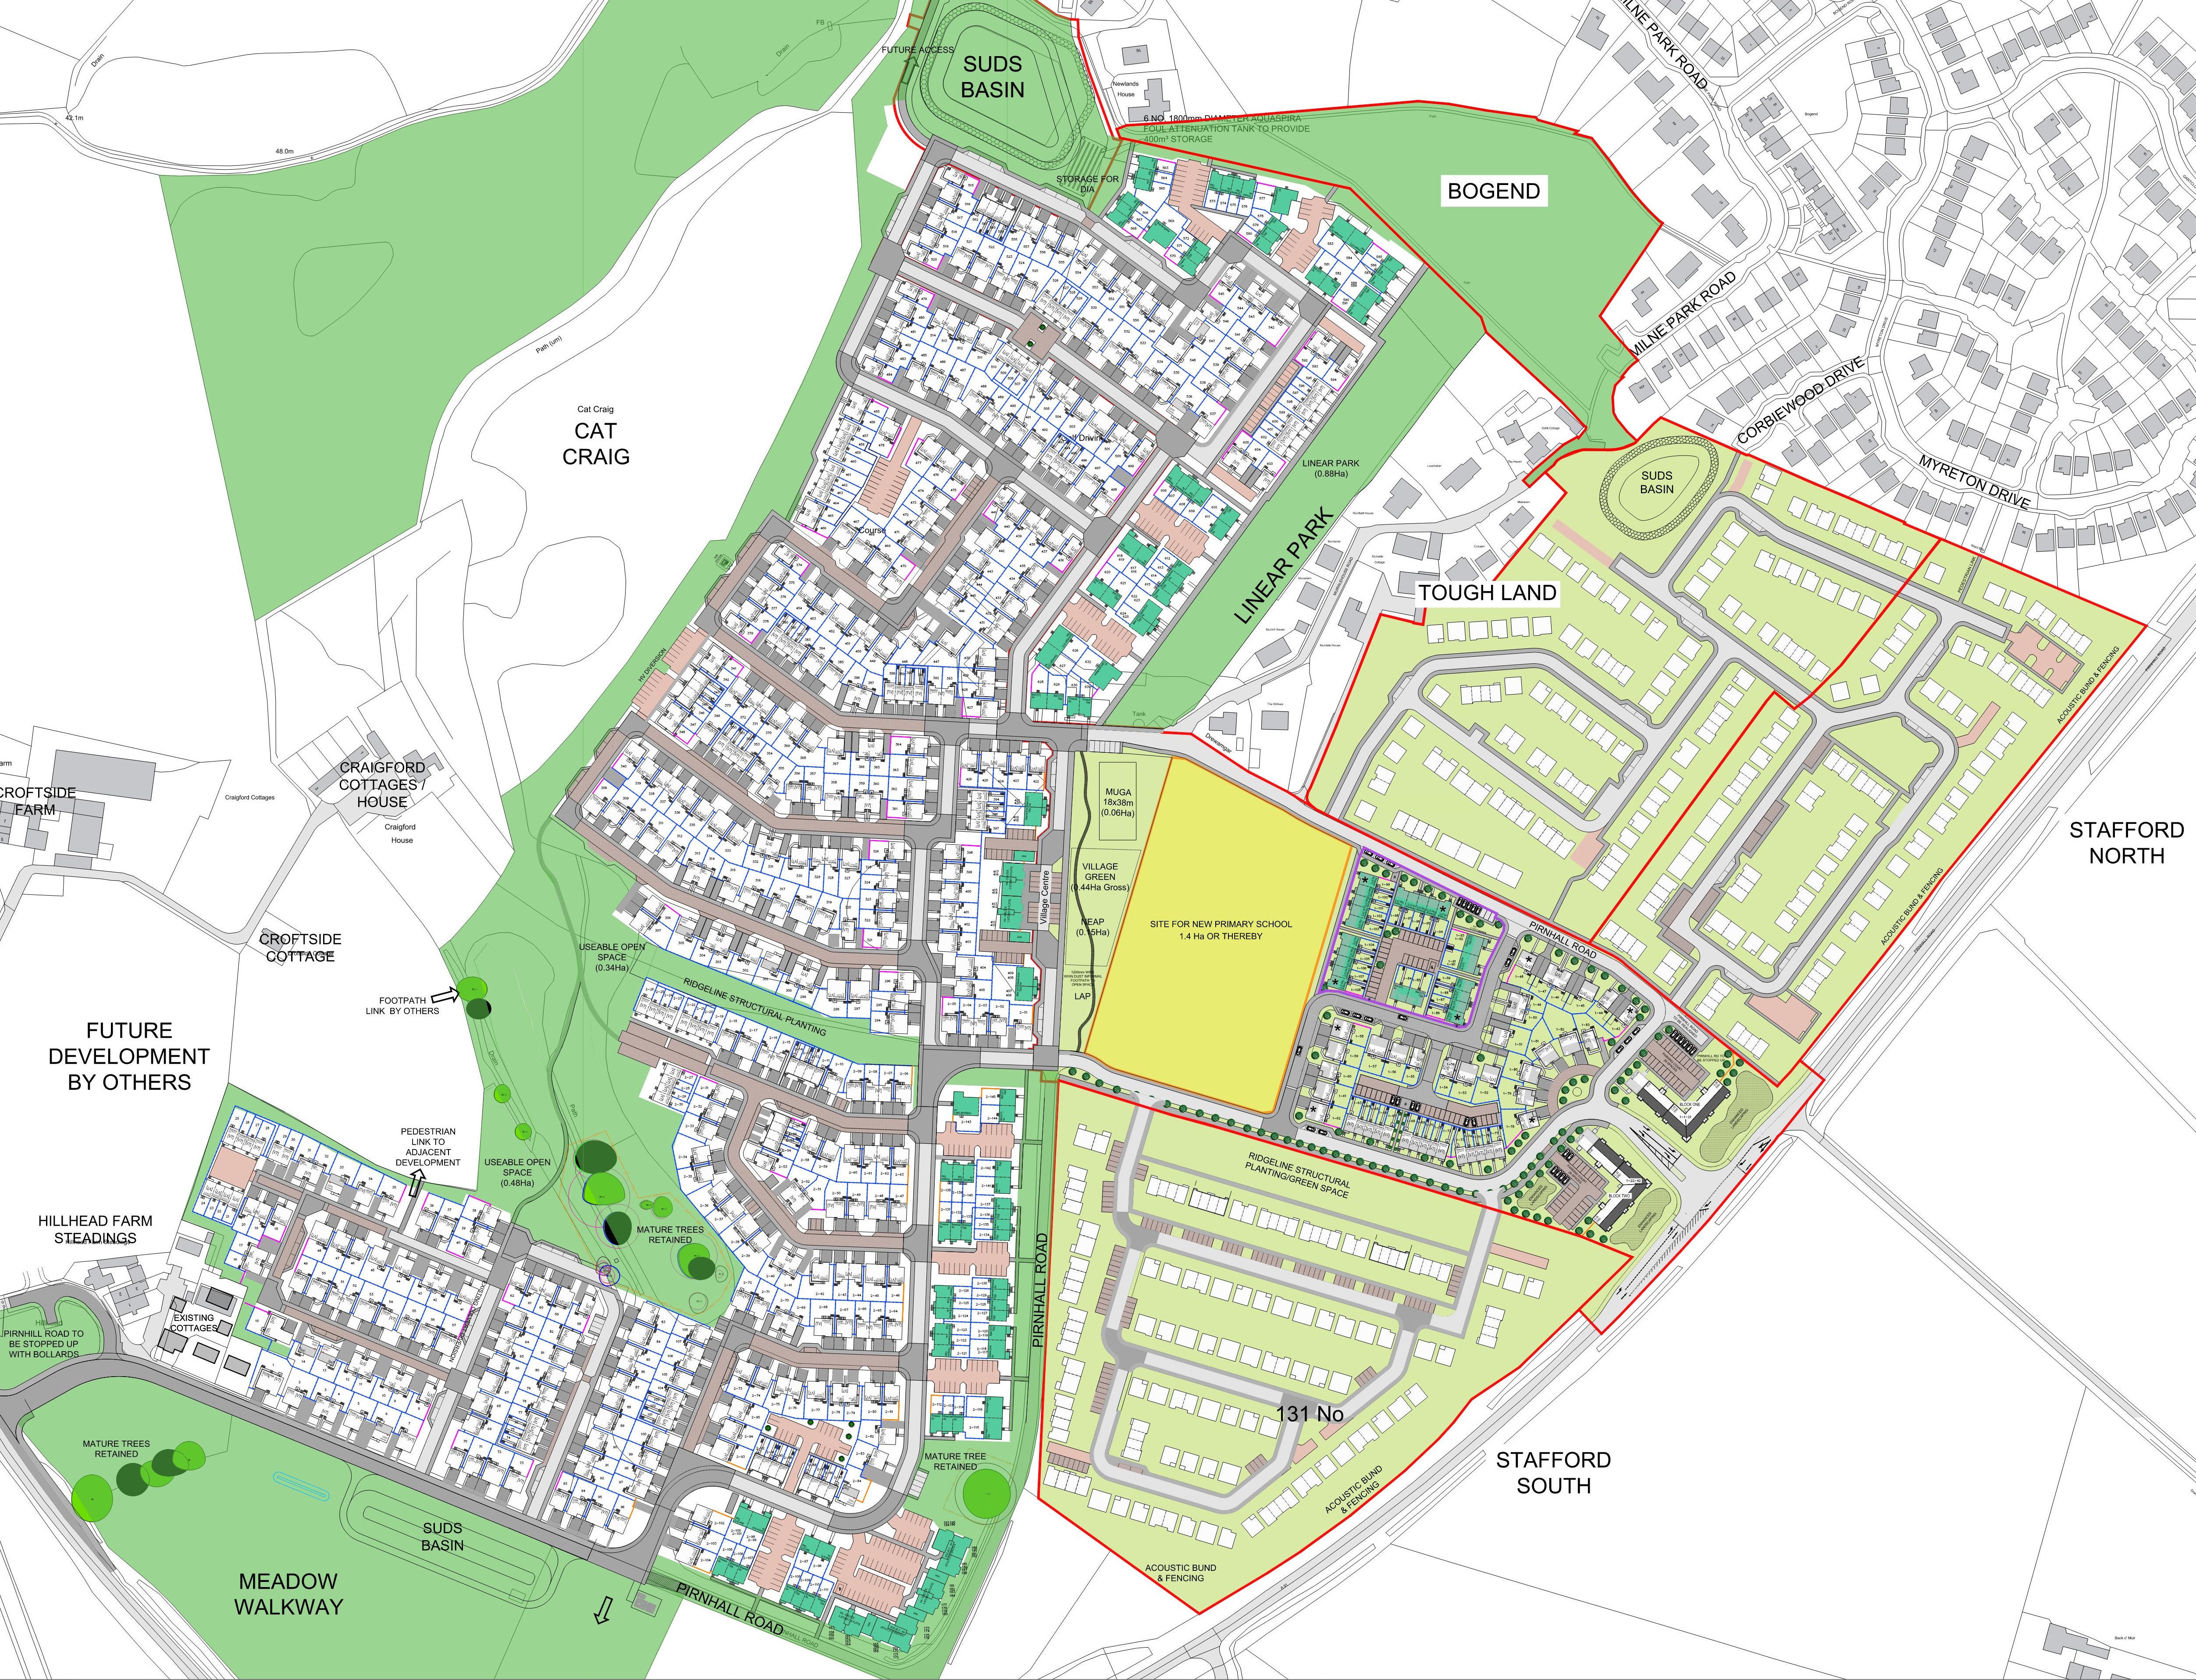 Community views to shape new proposals for South Stirling Gateway site